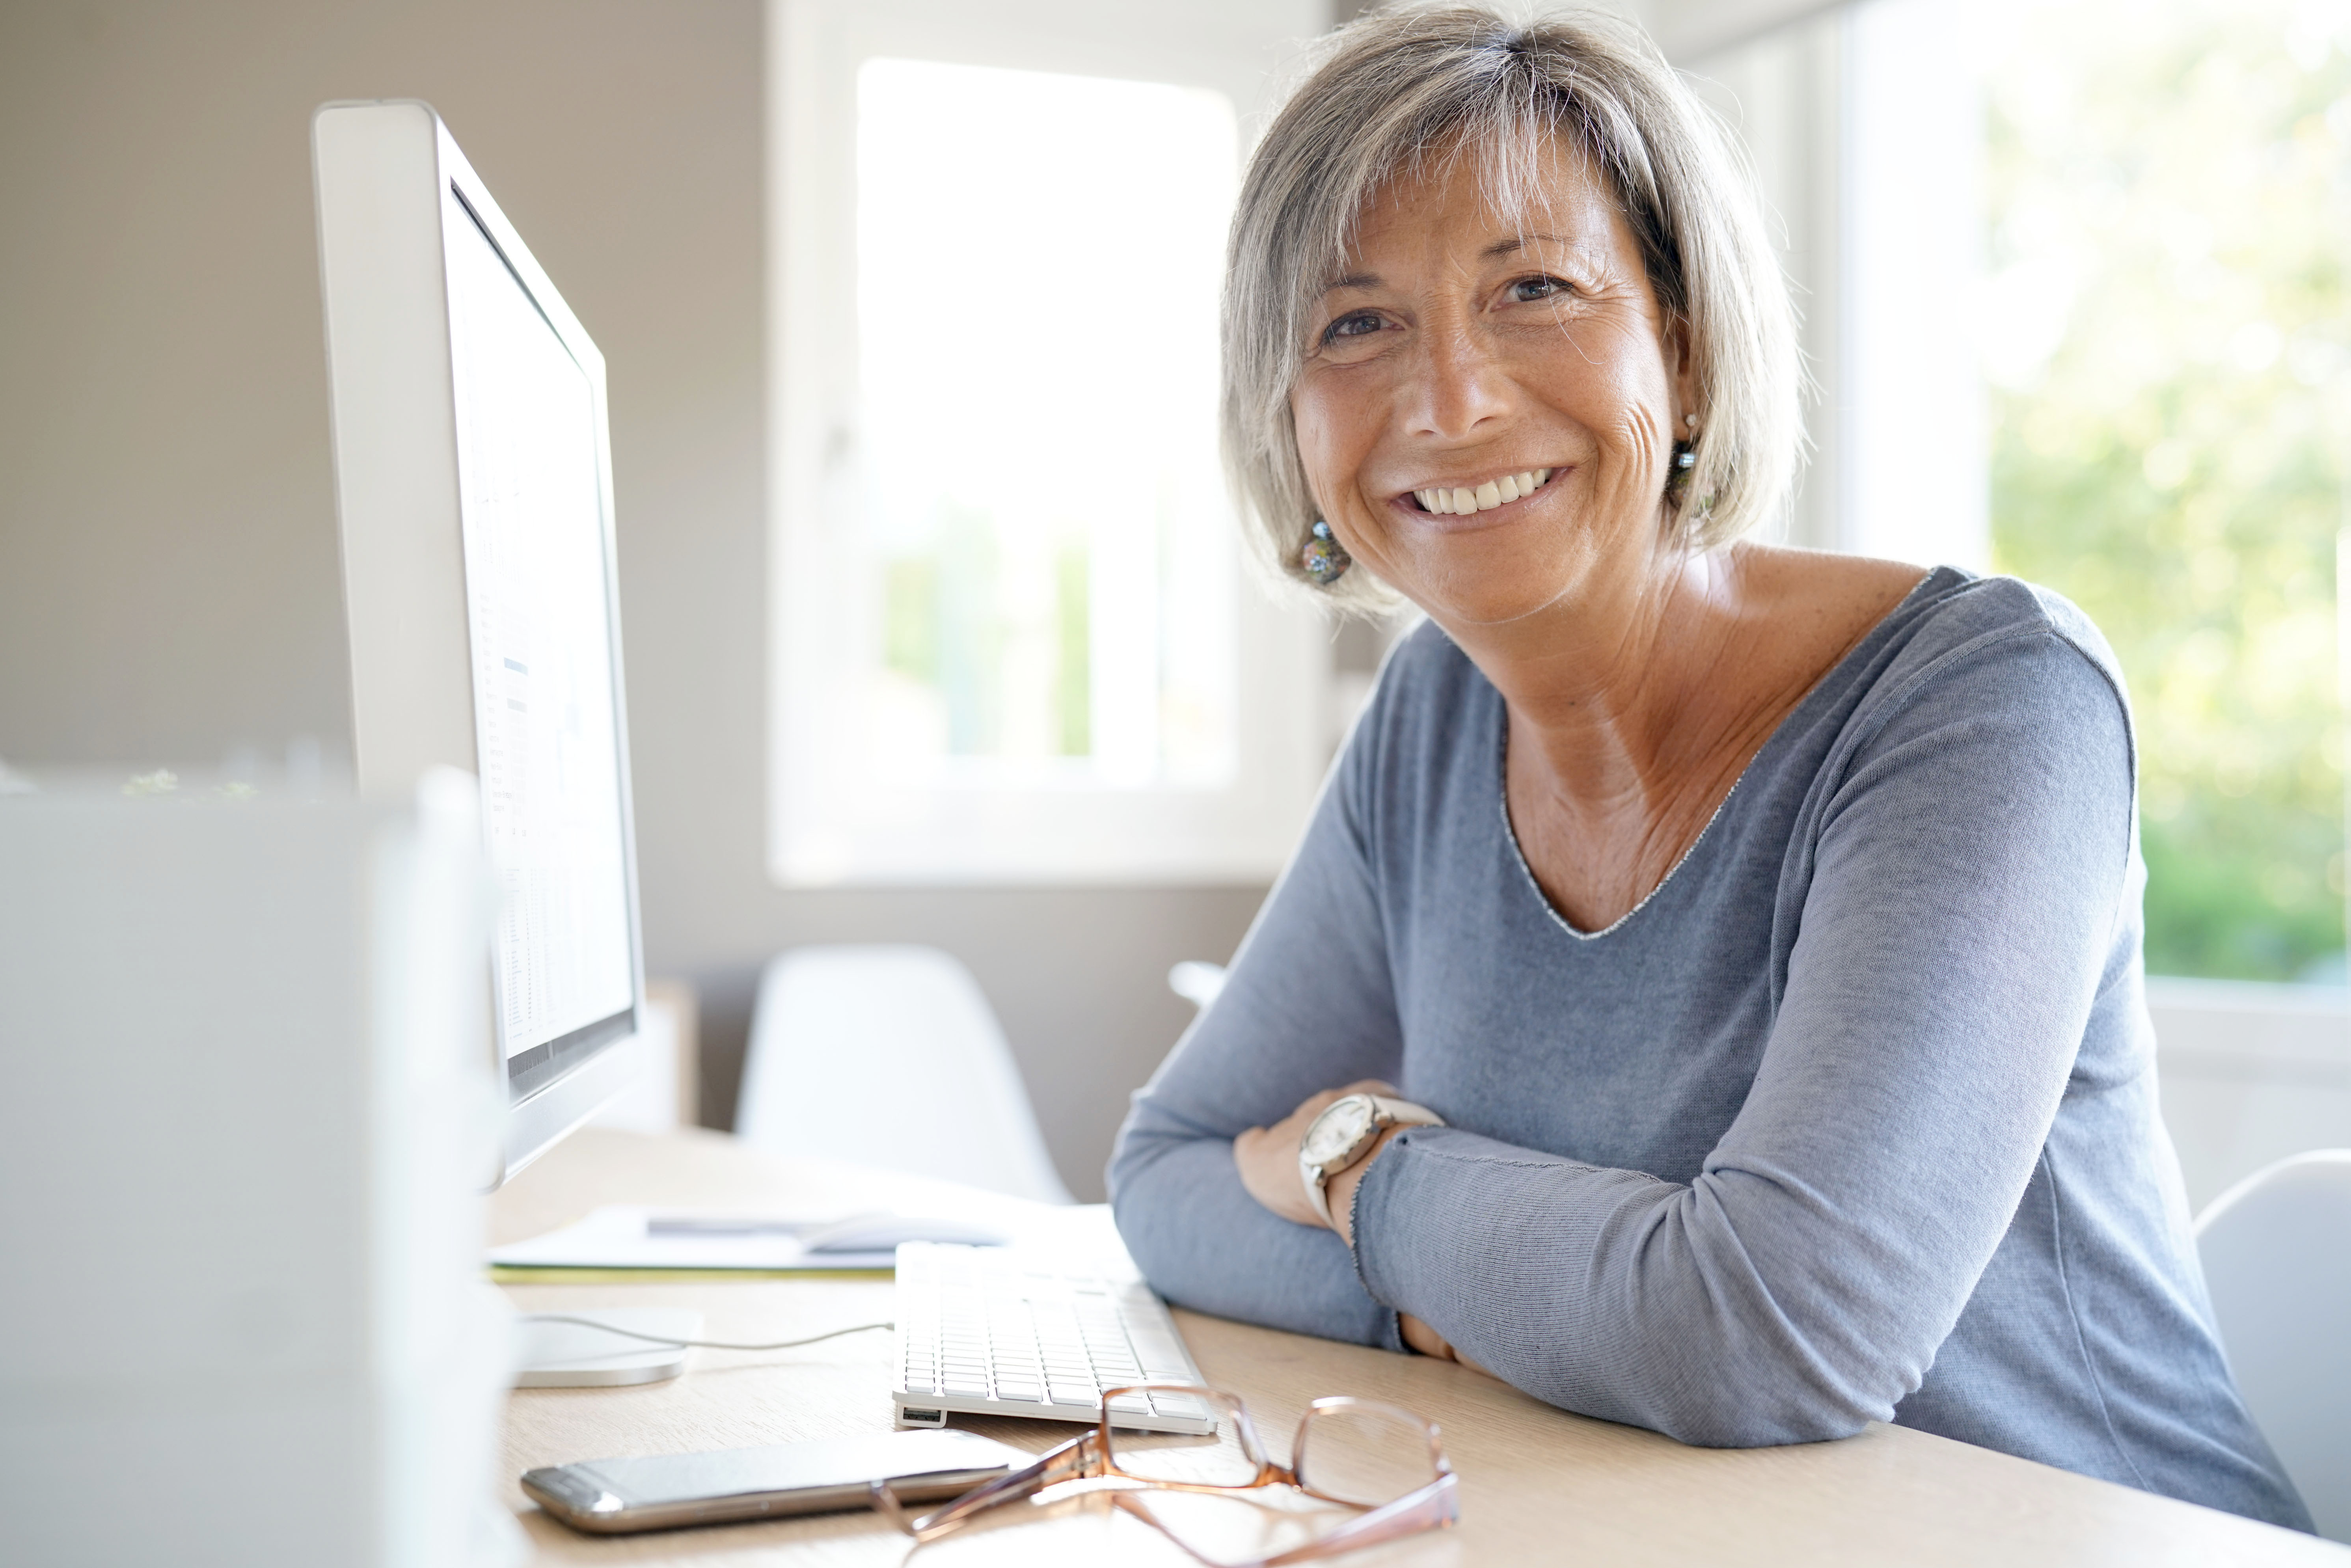 Image of older adult woman sitting at a computer smiling and facing the camera.